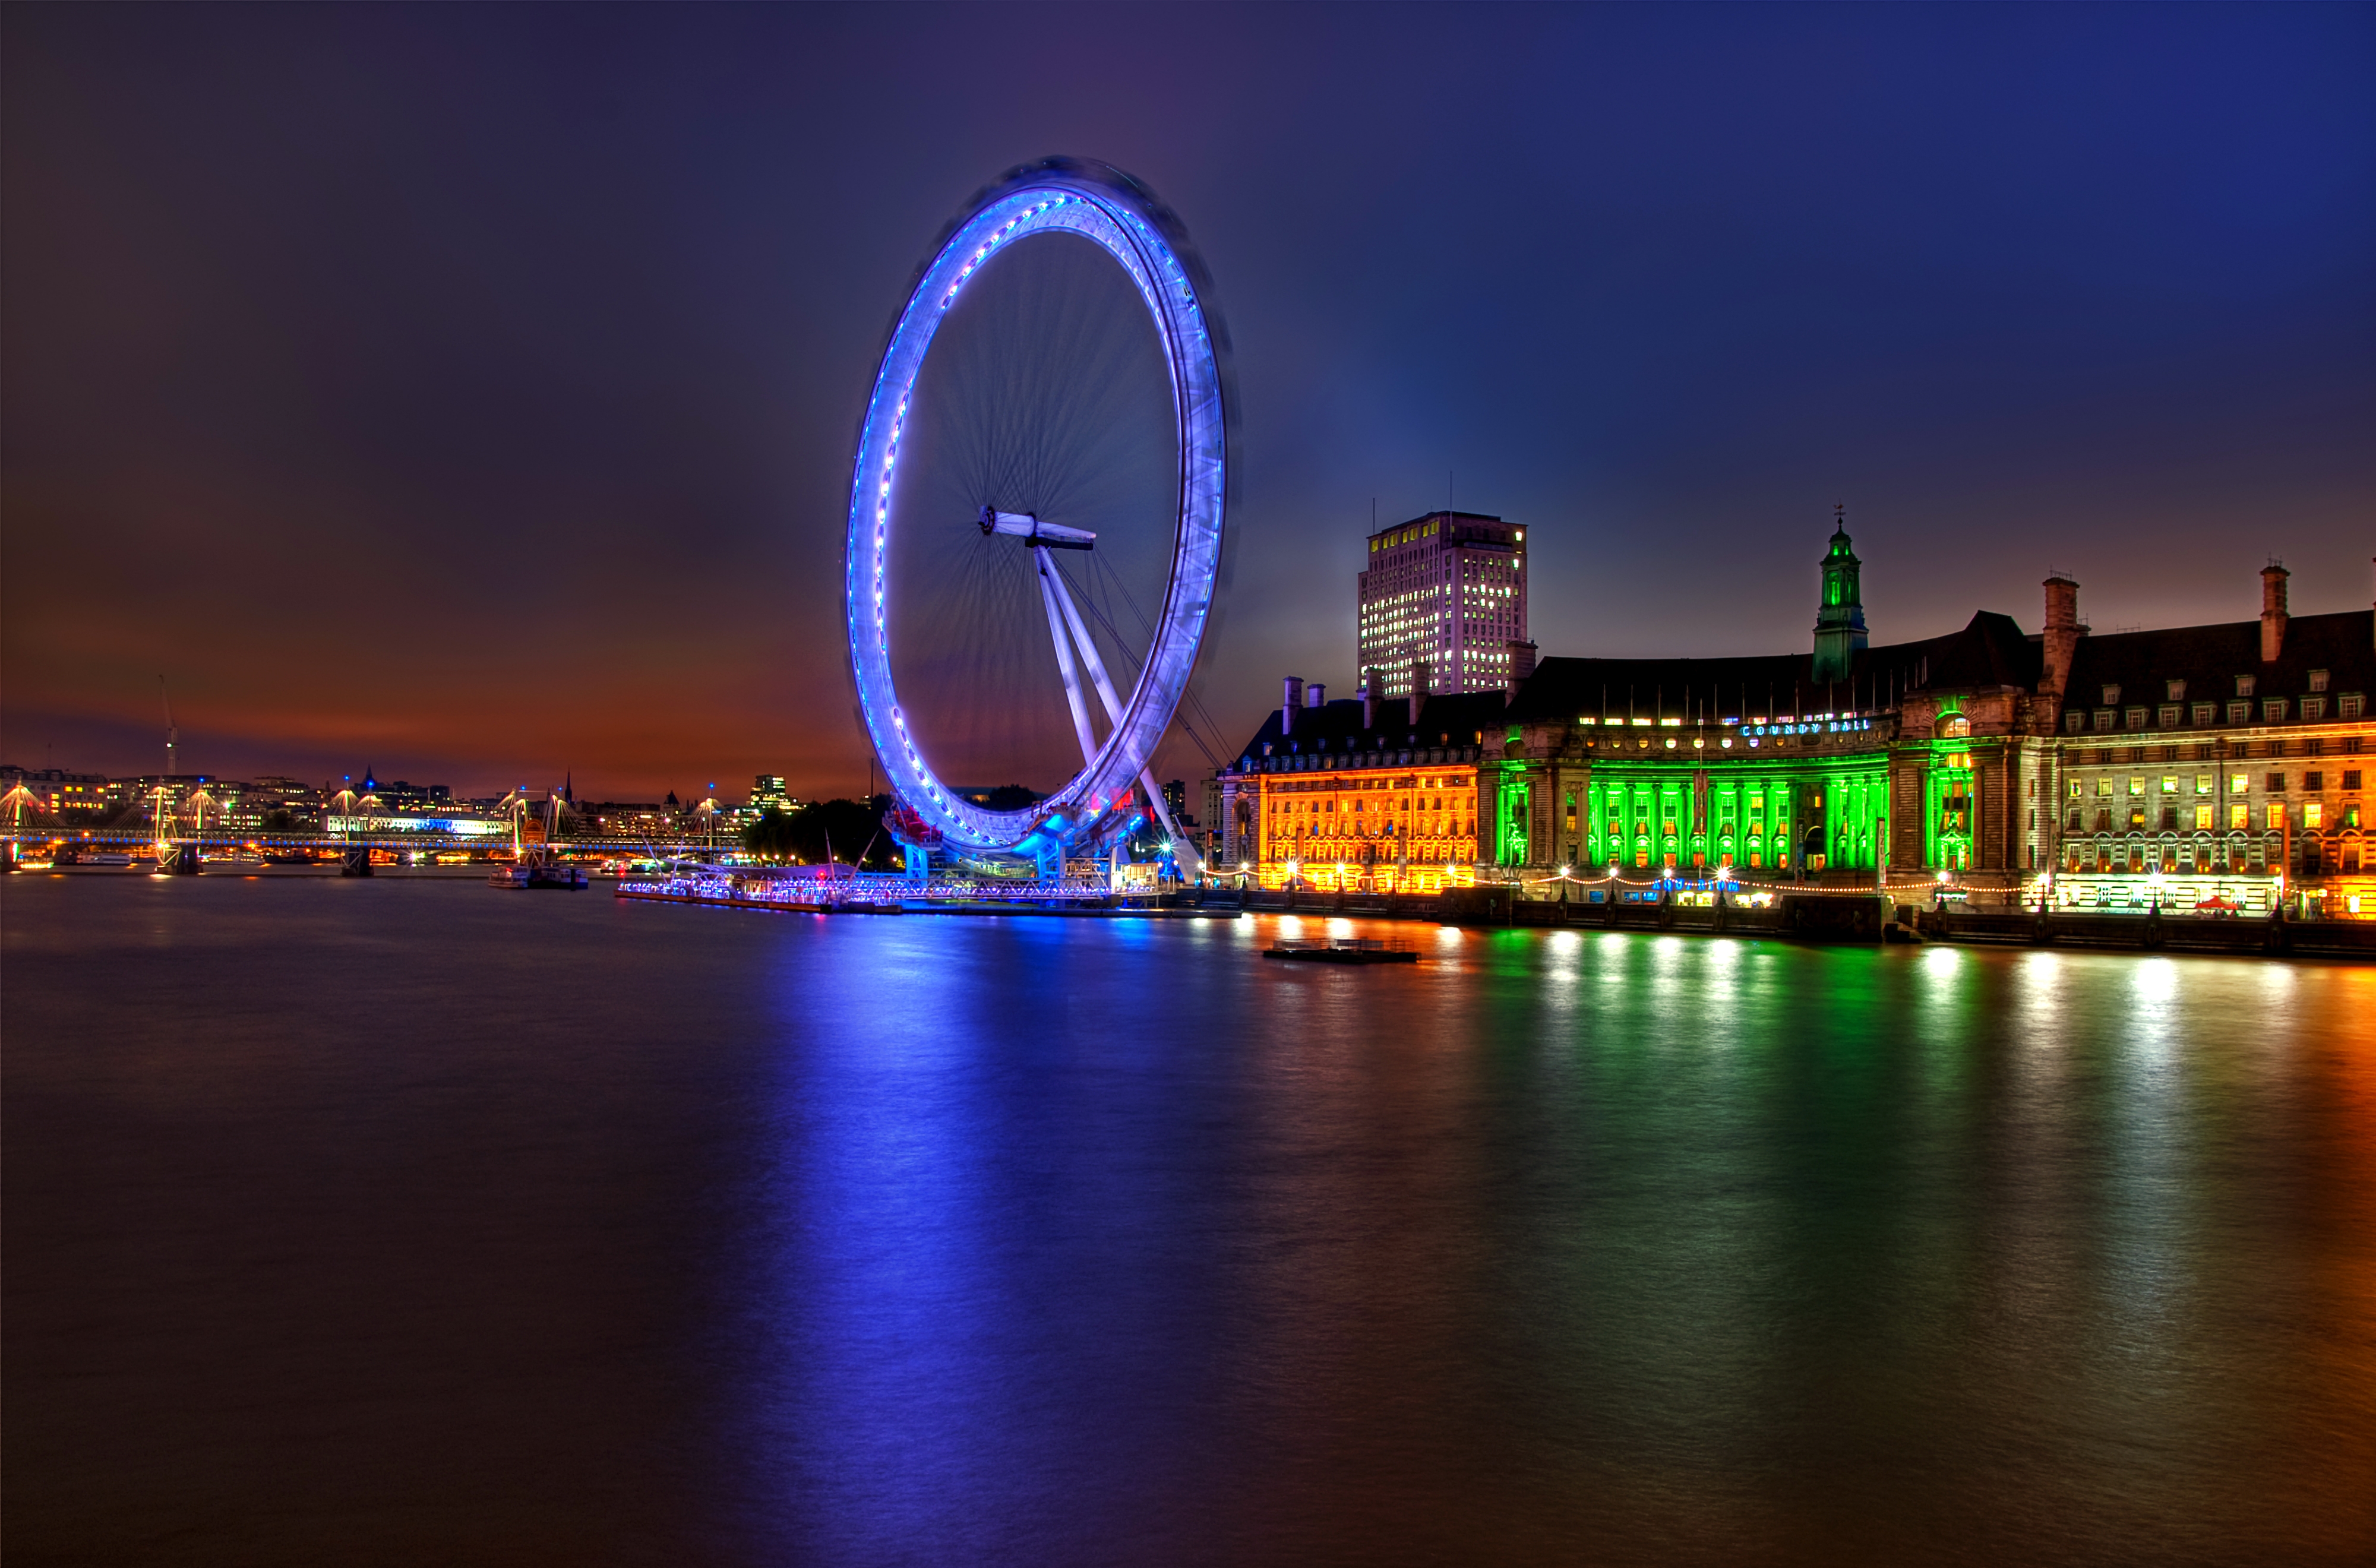 63174 download wallpaper building, cities, rivers, great britain, architecture, london, lights, backlight, illumination, evening, ferris wheel, united kingdom, england, capital, thames screensavers and pictures for free